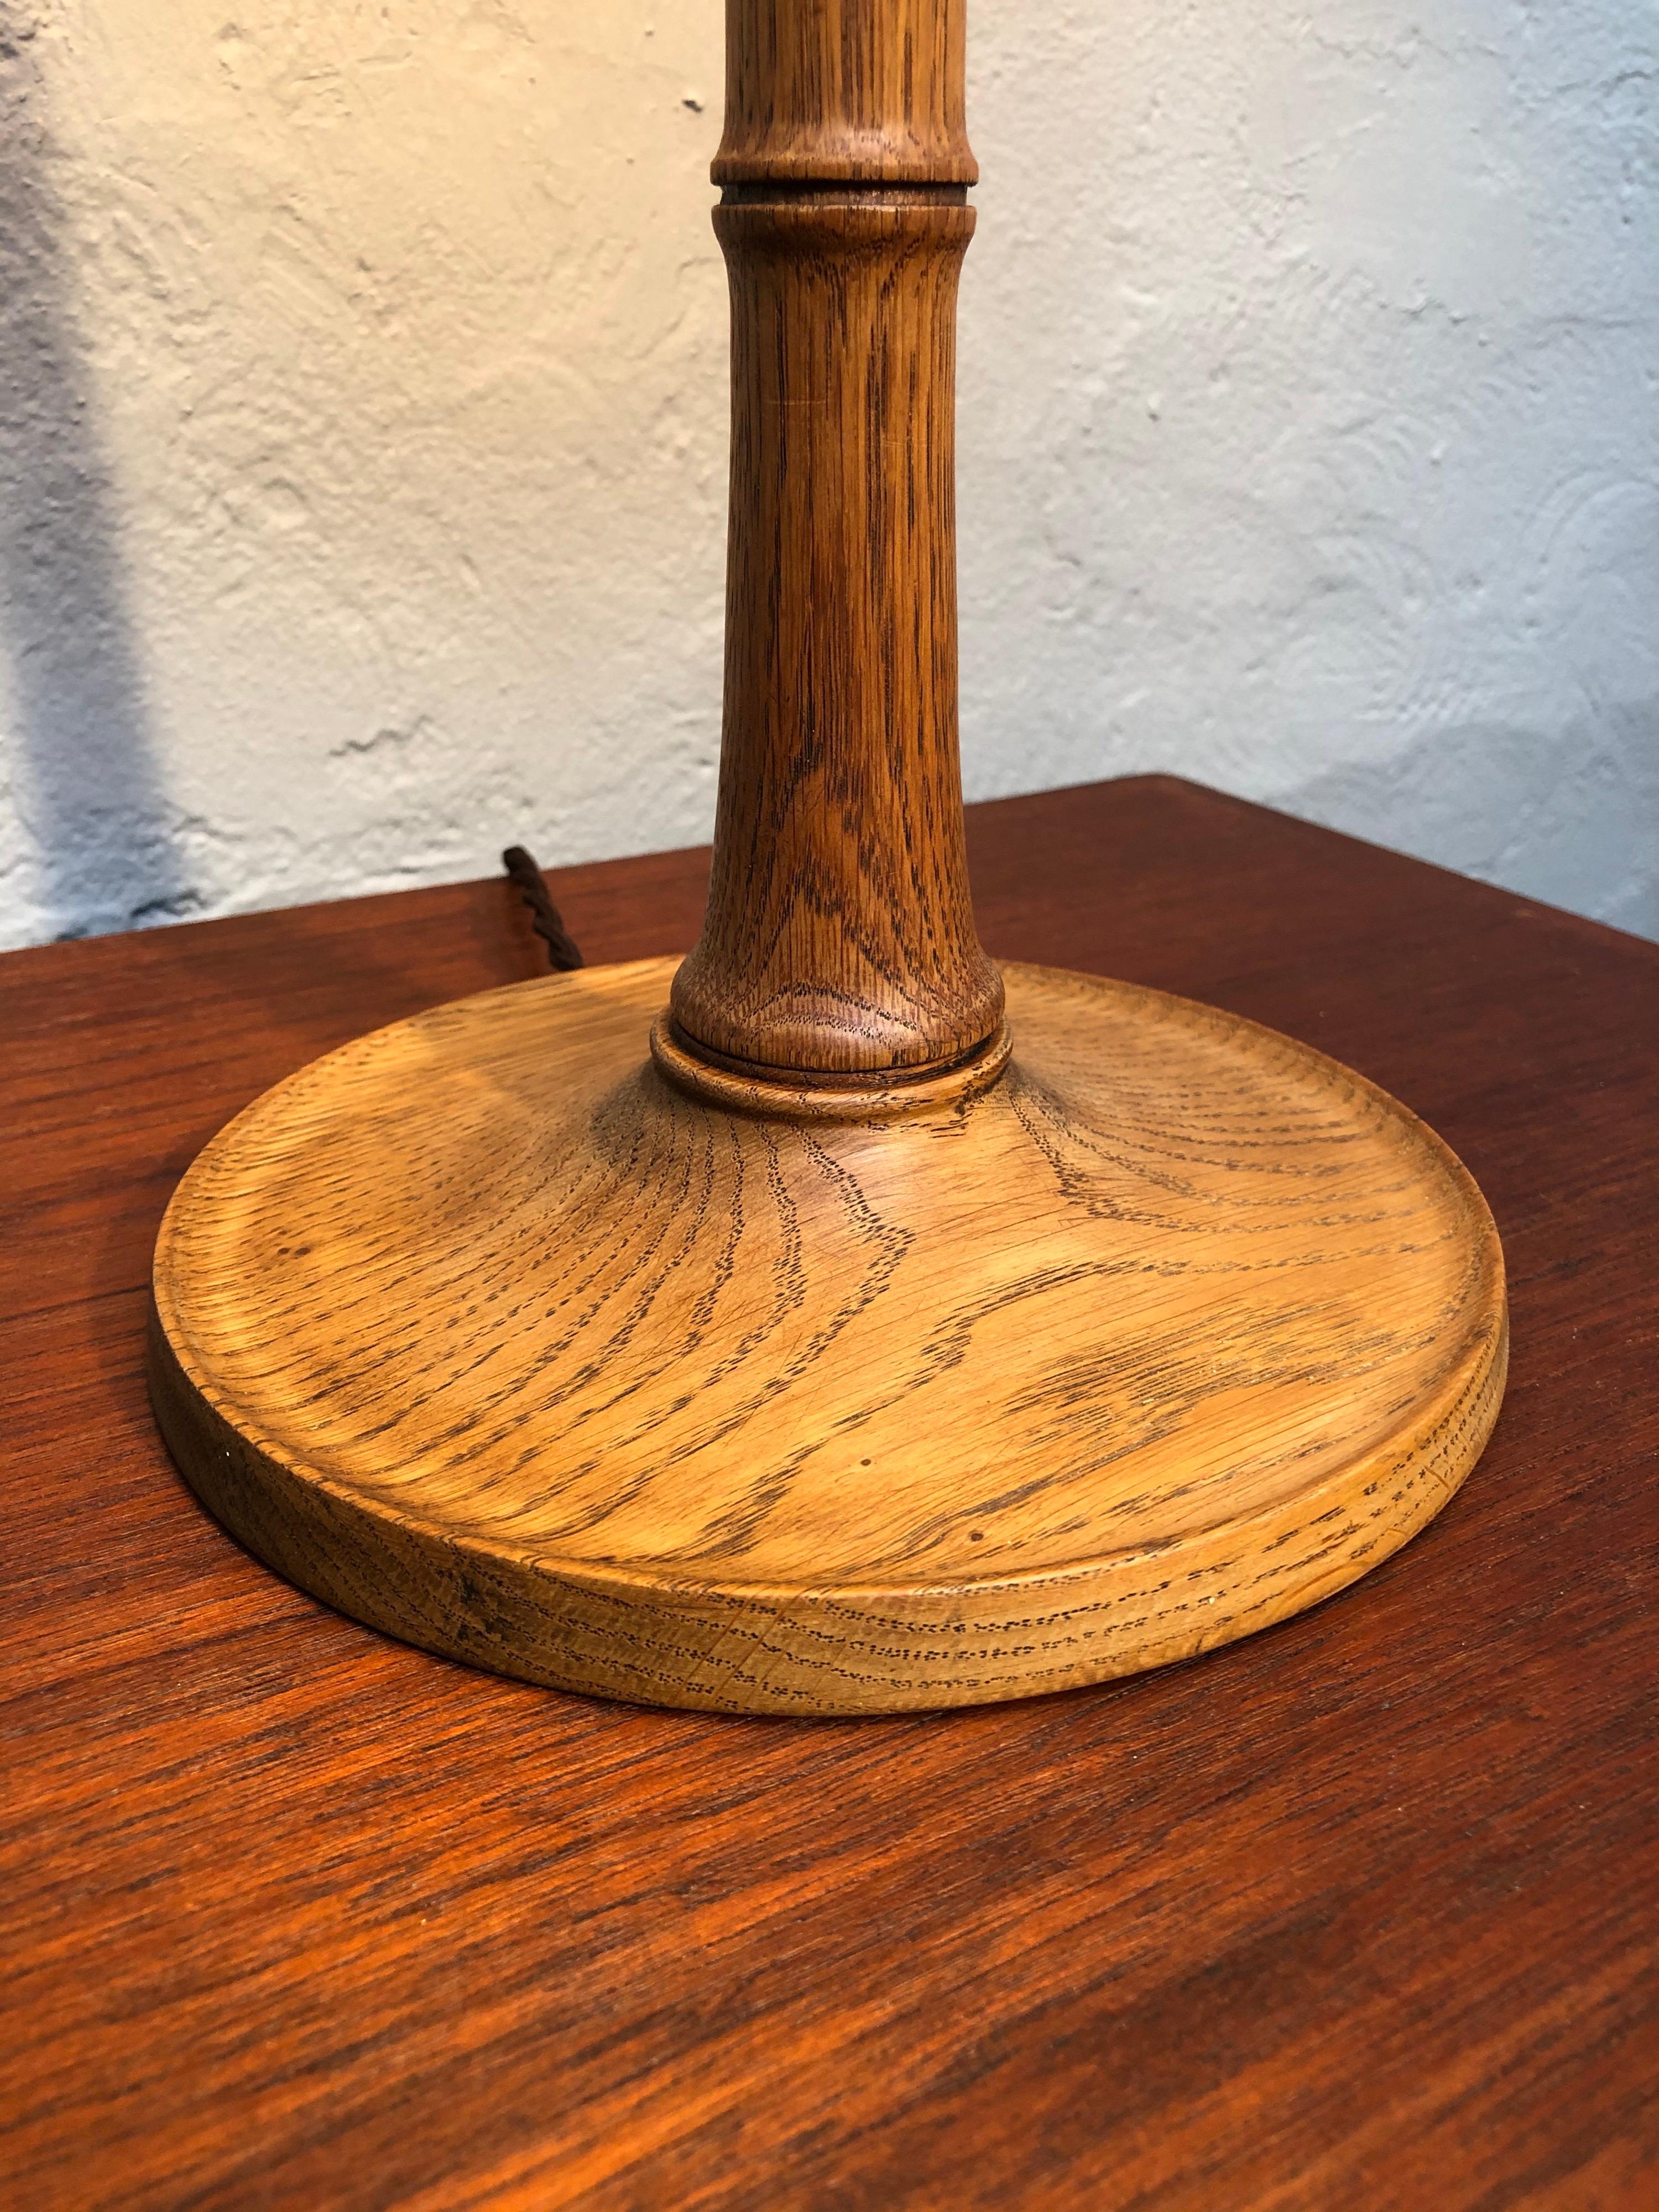 Hand-Crafted Iconic Danish Esben Klint Table Lamp Model 301 in Solid Teak